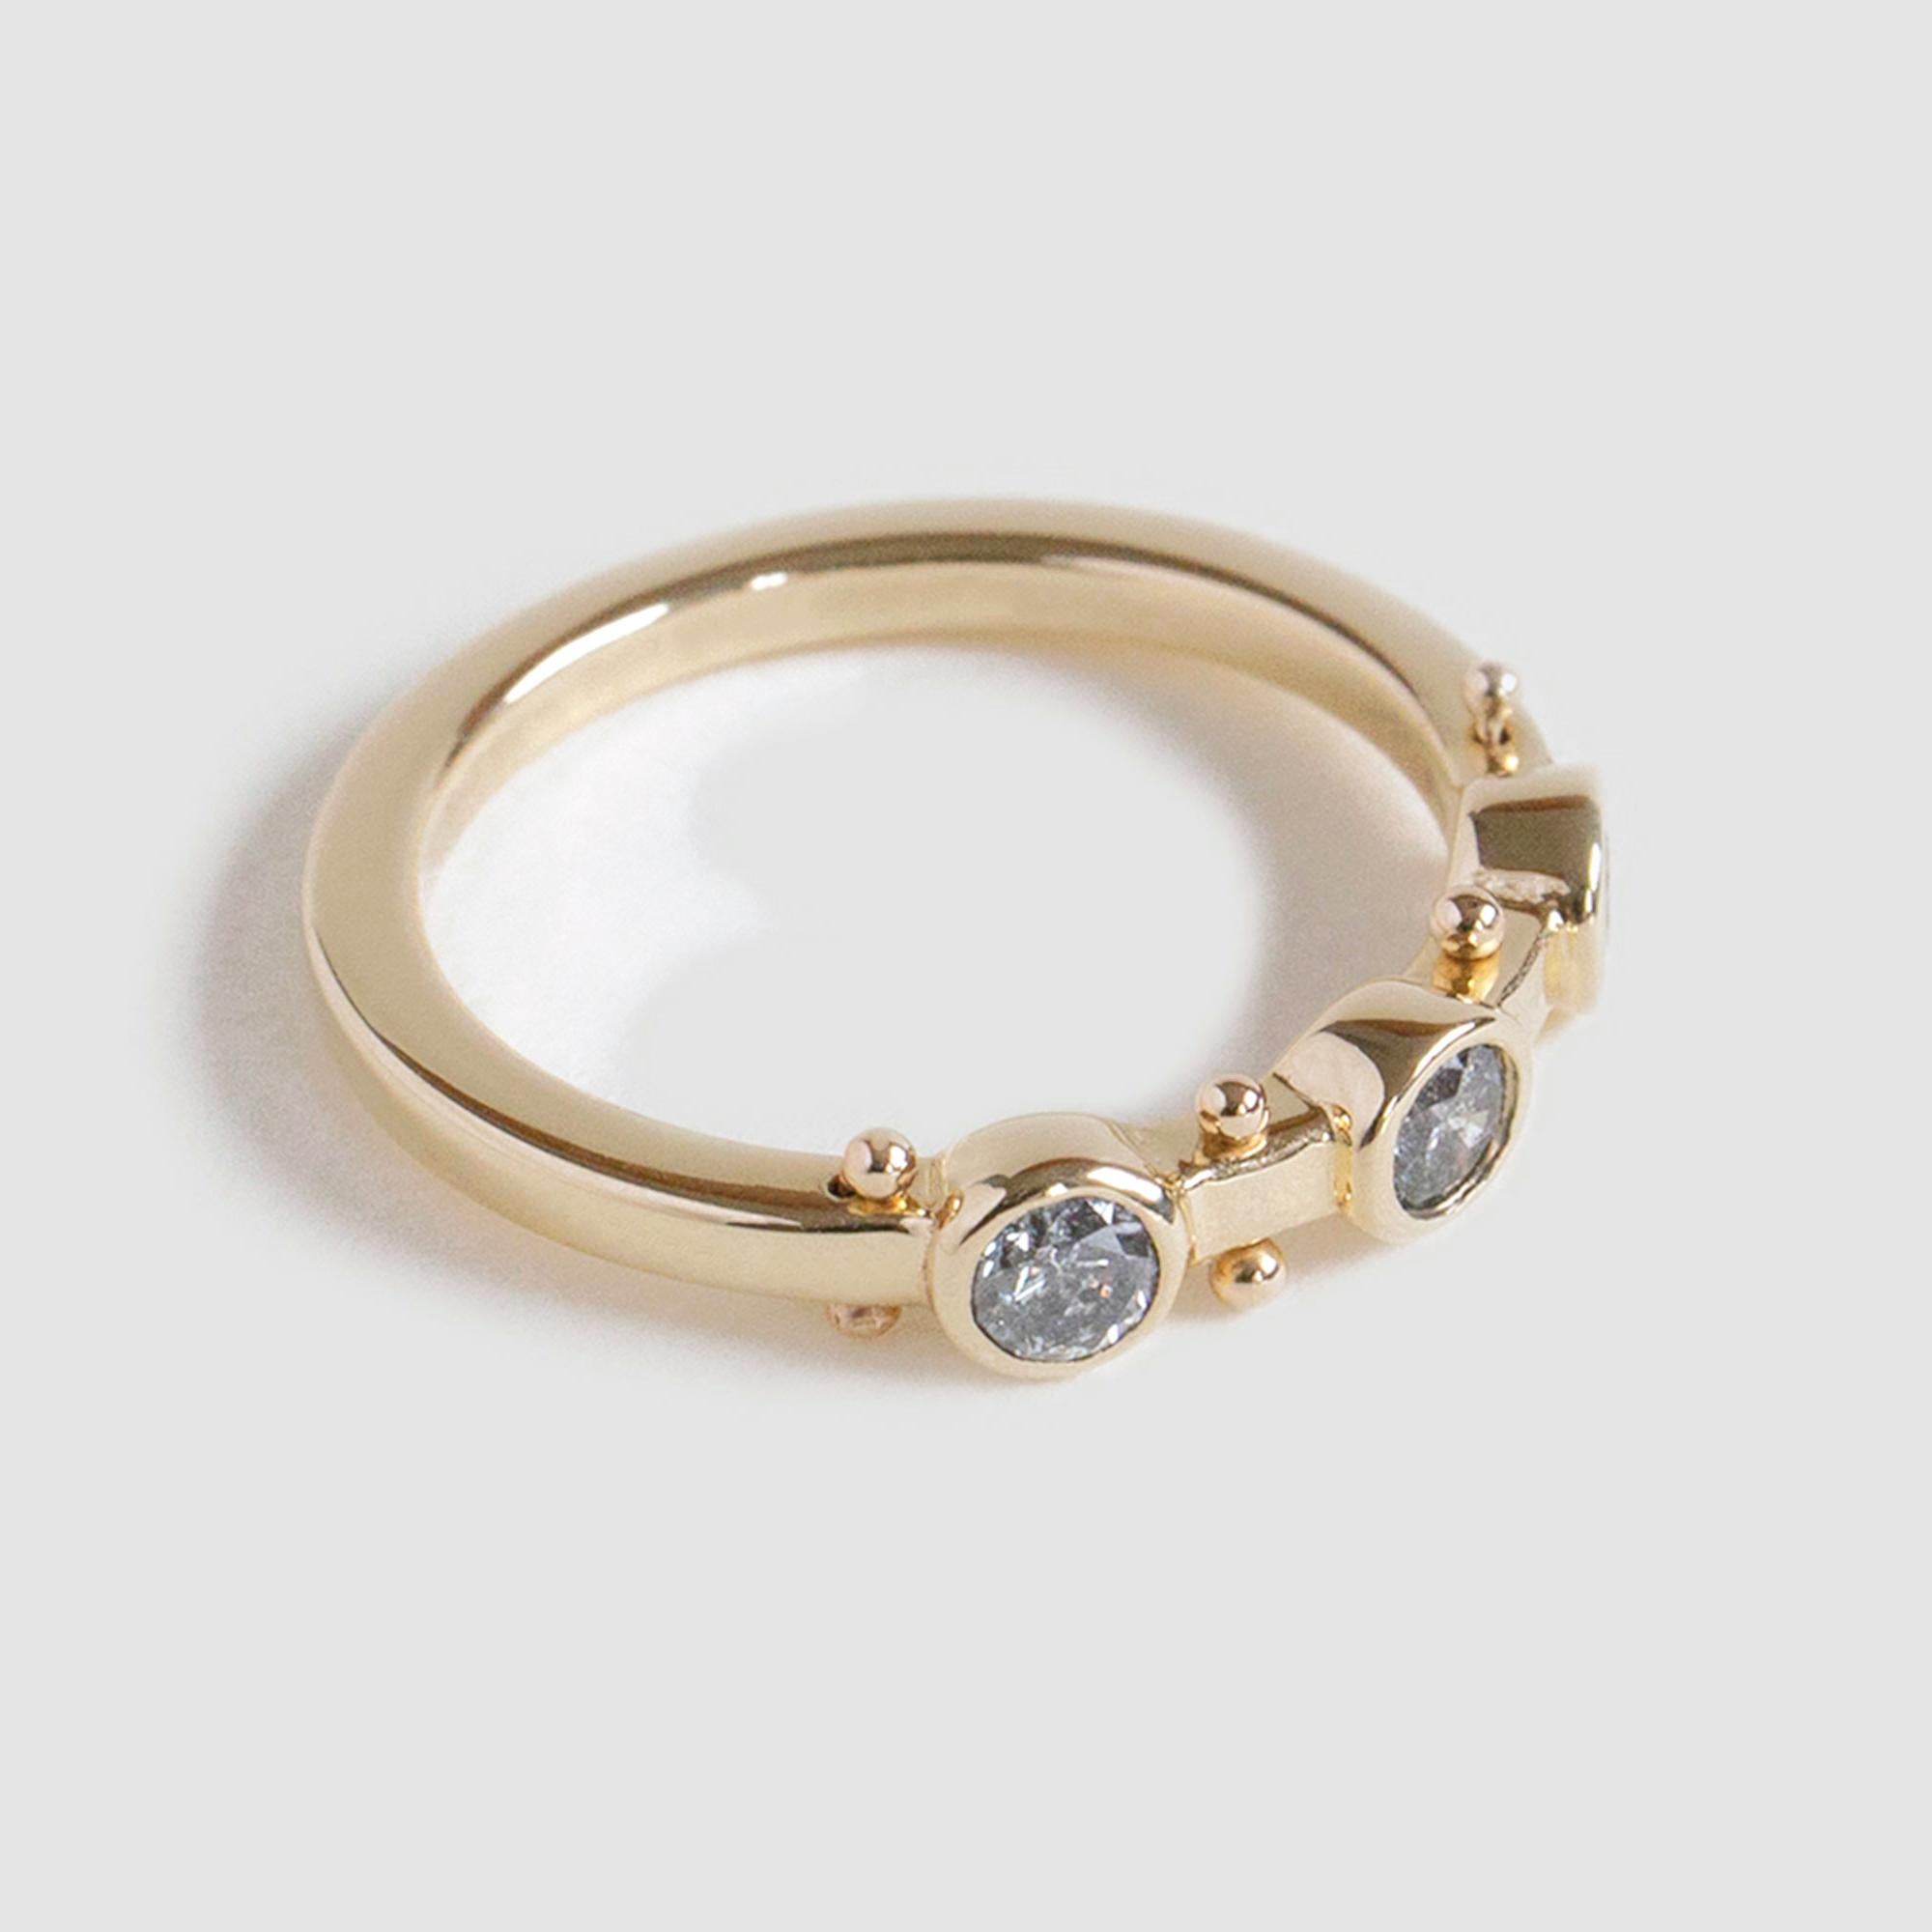 Kaori, meaning fragrance in Japanese. A patchwork of sensory elements, creating a liveliness easier felt than described. The straight profile of this band makes it easy to stack alongside other flat bands.

14K YELLOW GOLD
US RING SIZE 7
*Resizing